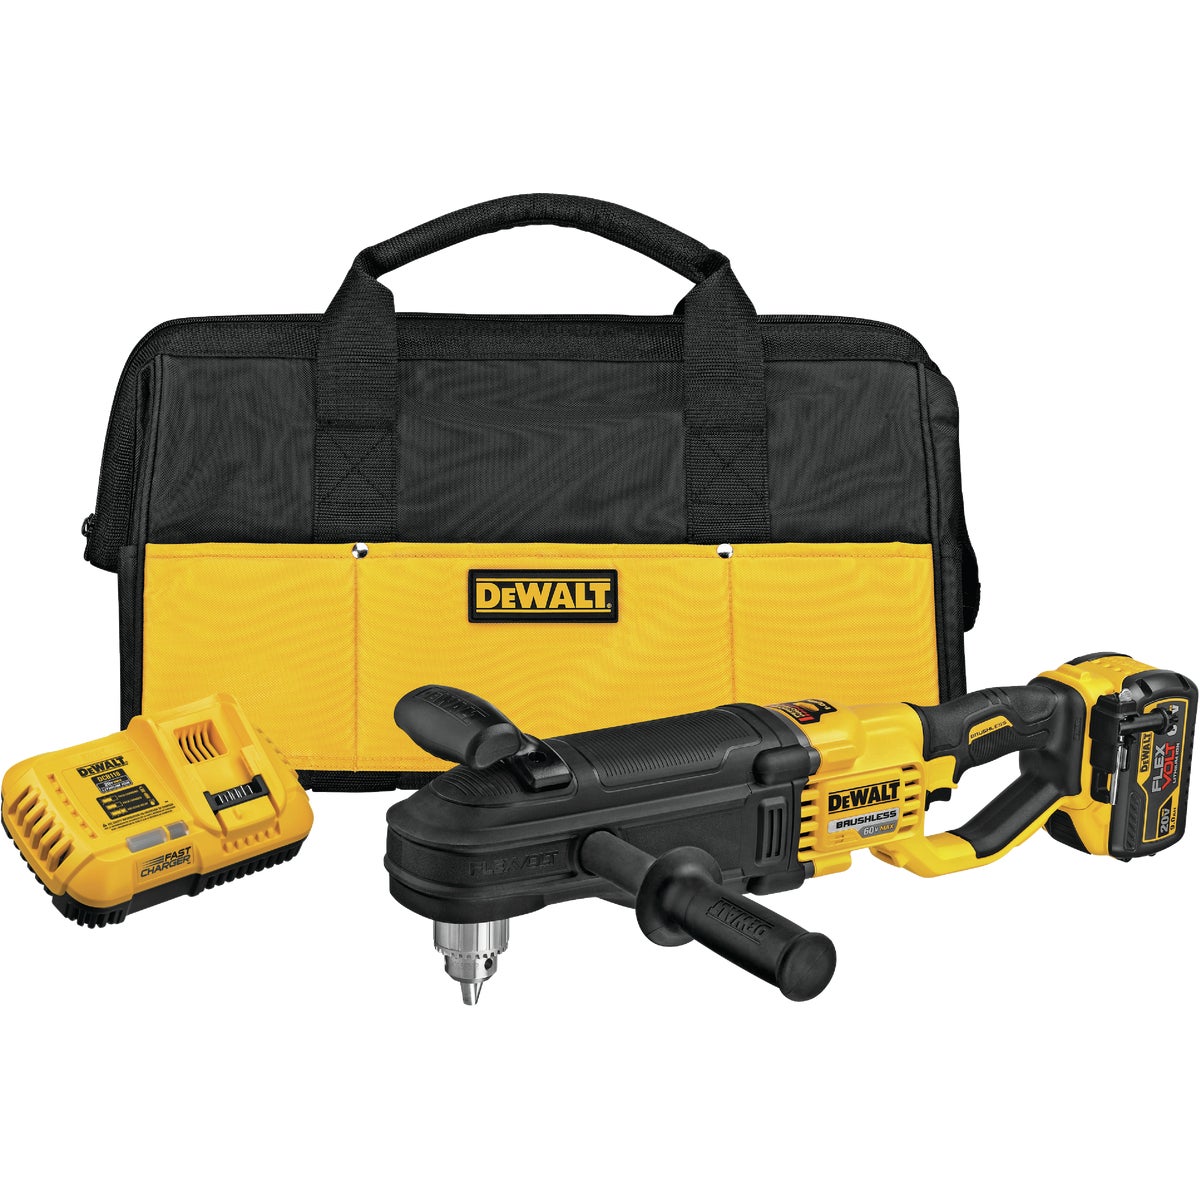 DEWALT 60-Volt MAX Lithium-Ion Brushless 1/2 In. In-Line Stud & Joist Cordless Drill Kit with E-Clutch System